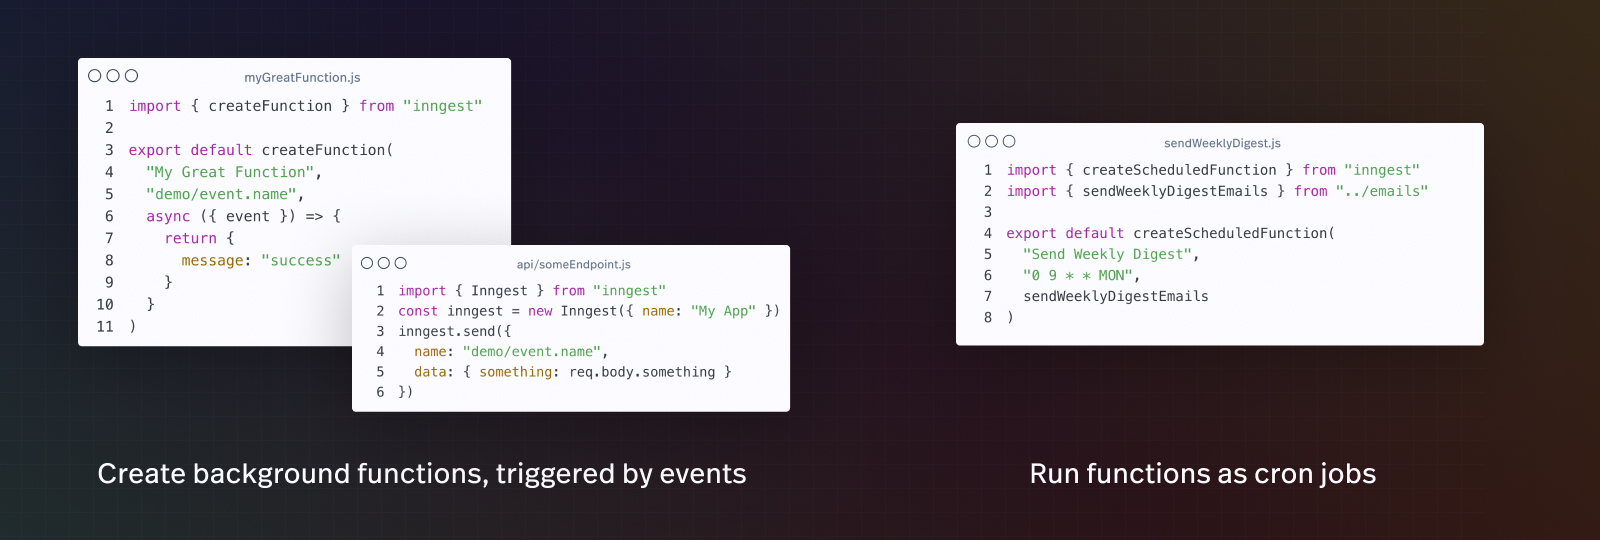 Code snippets of a background function, triggered by an event and a cron job